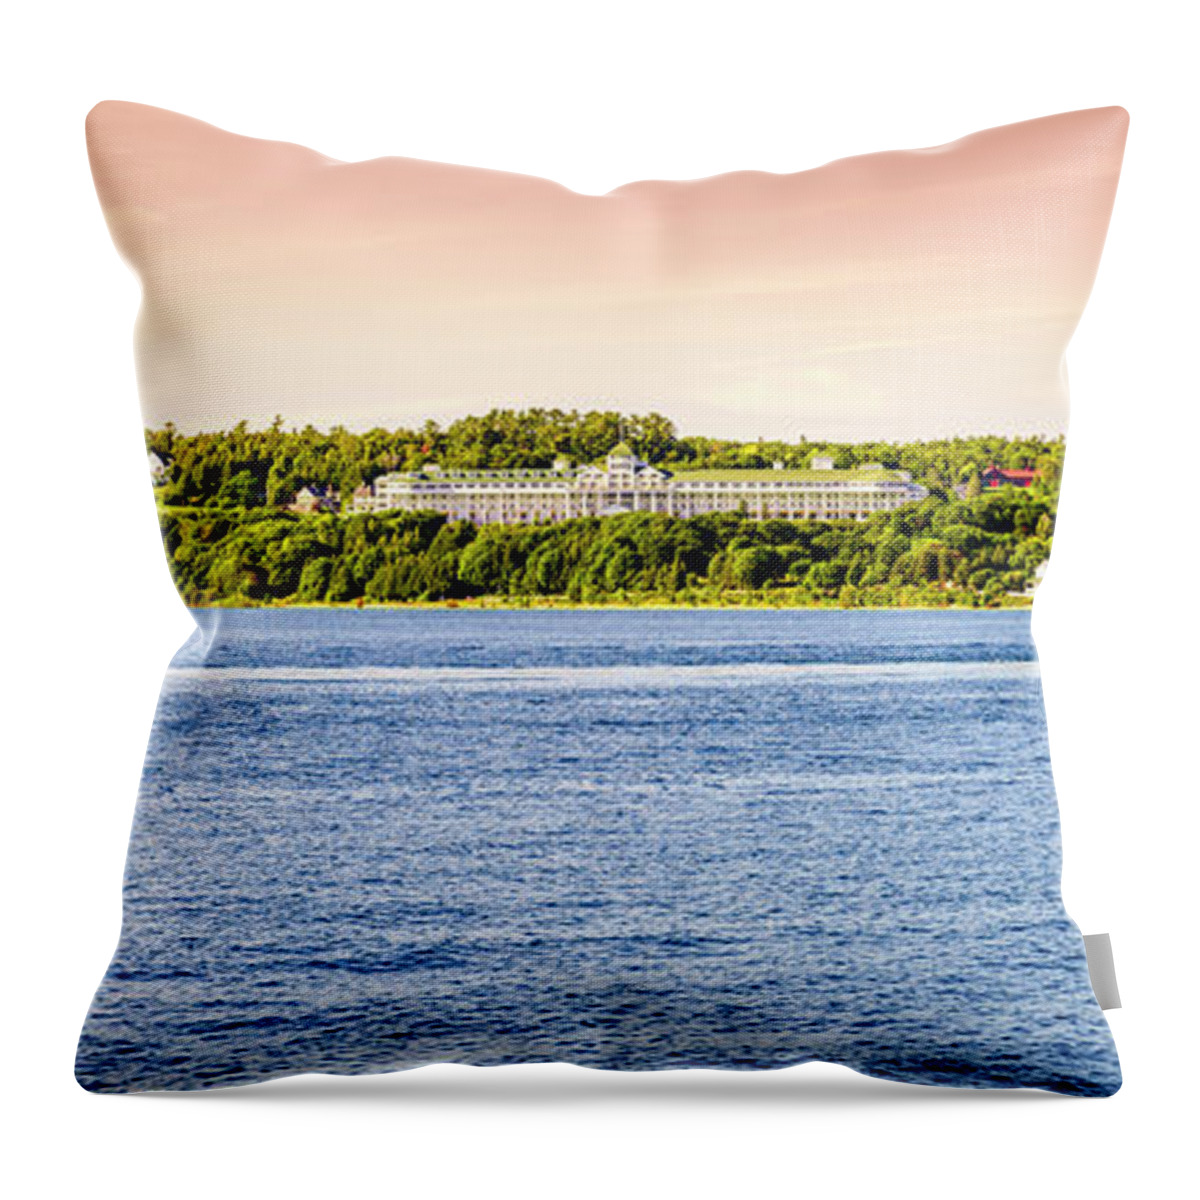 America Throw Pillow featuring the photograph Mackinac Island Grand Hotel by Alexey Stiop